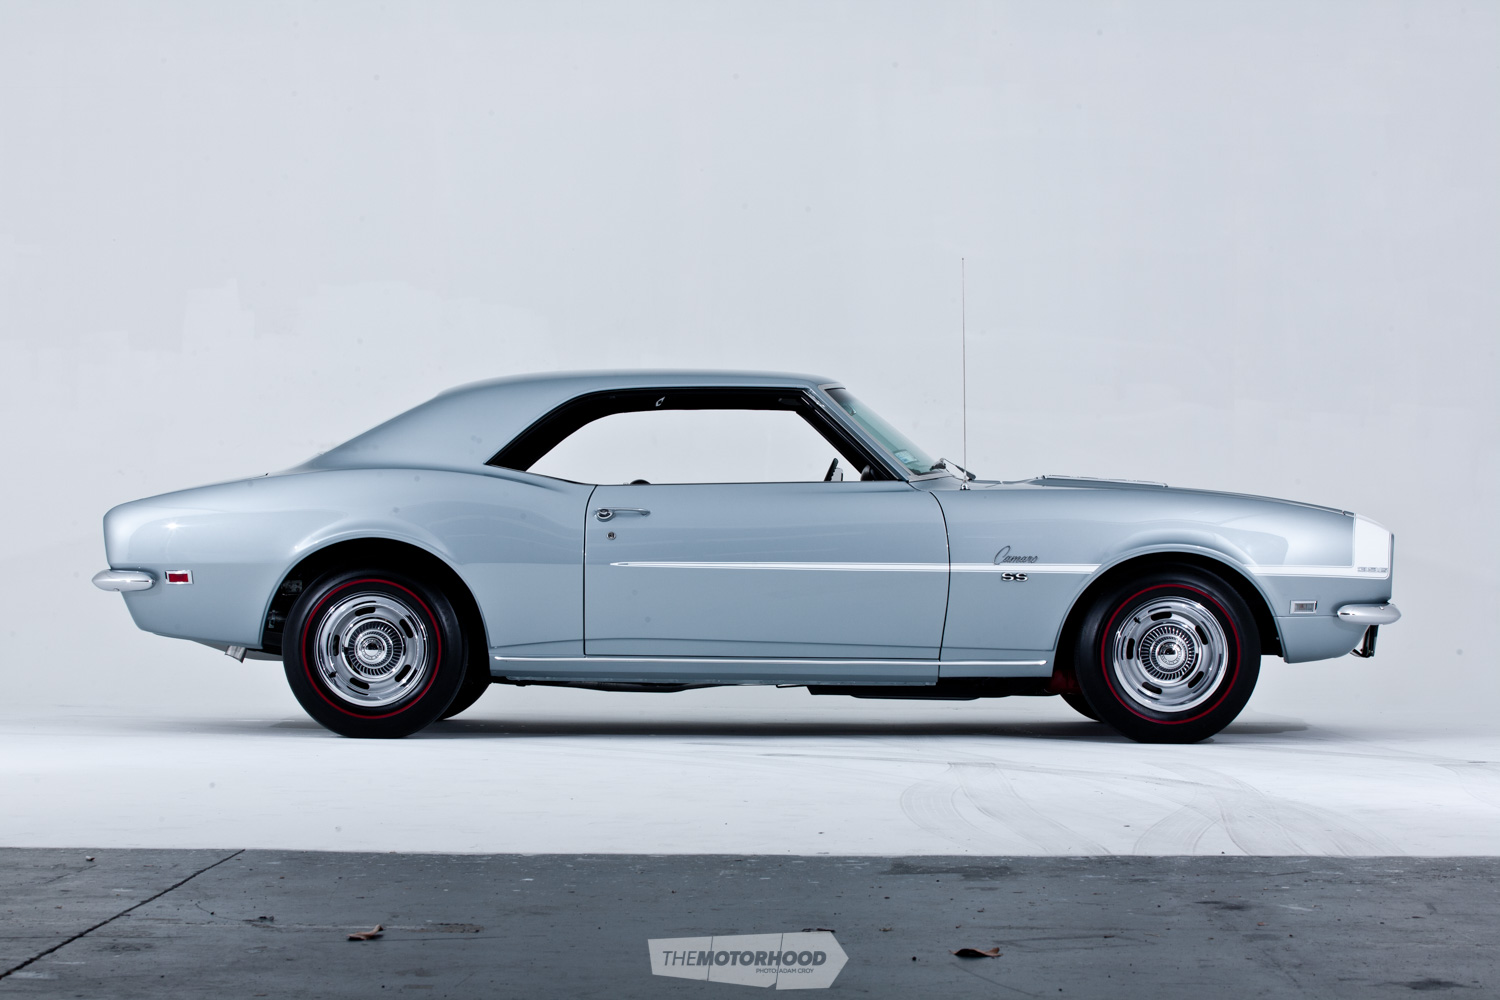 Super sport special: extremely rare L89-optioned '68 Camaro — The